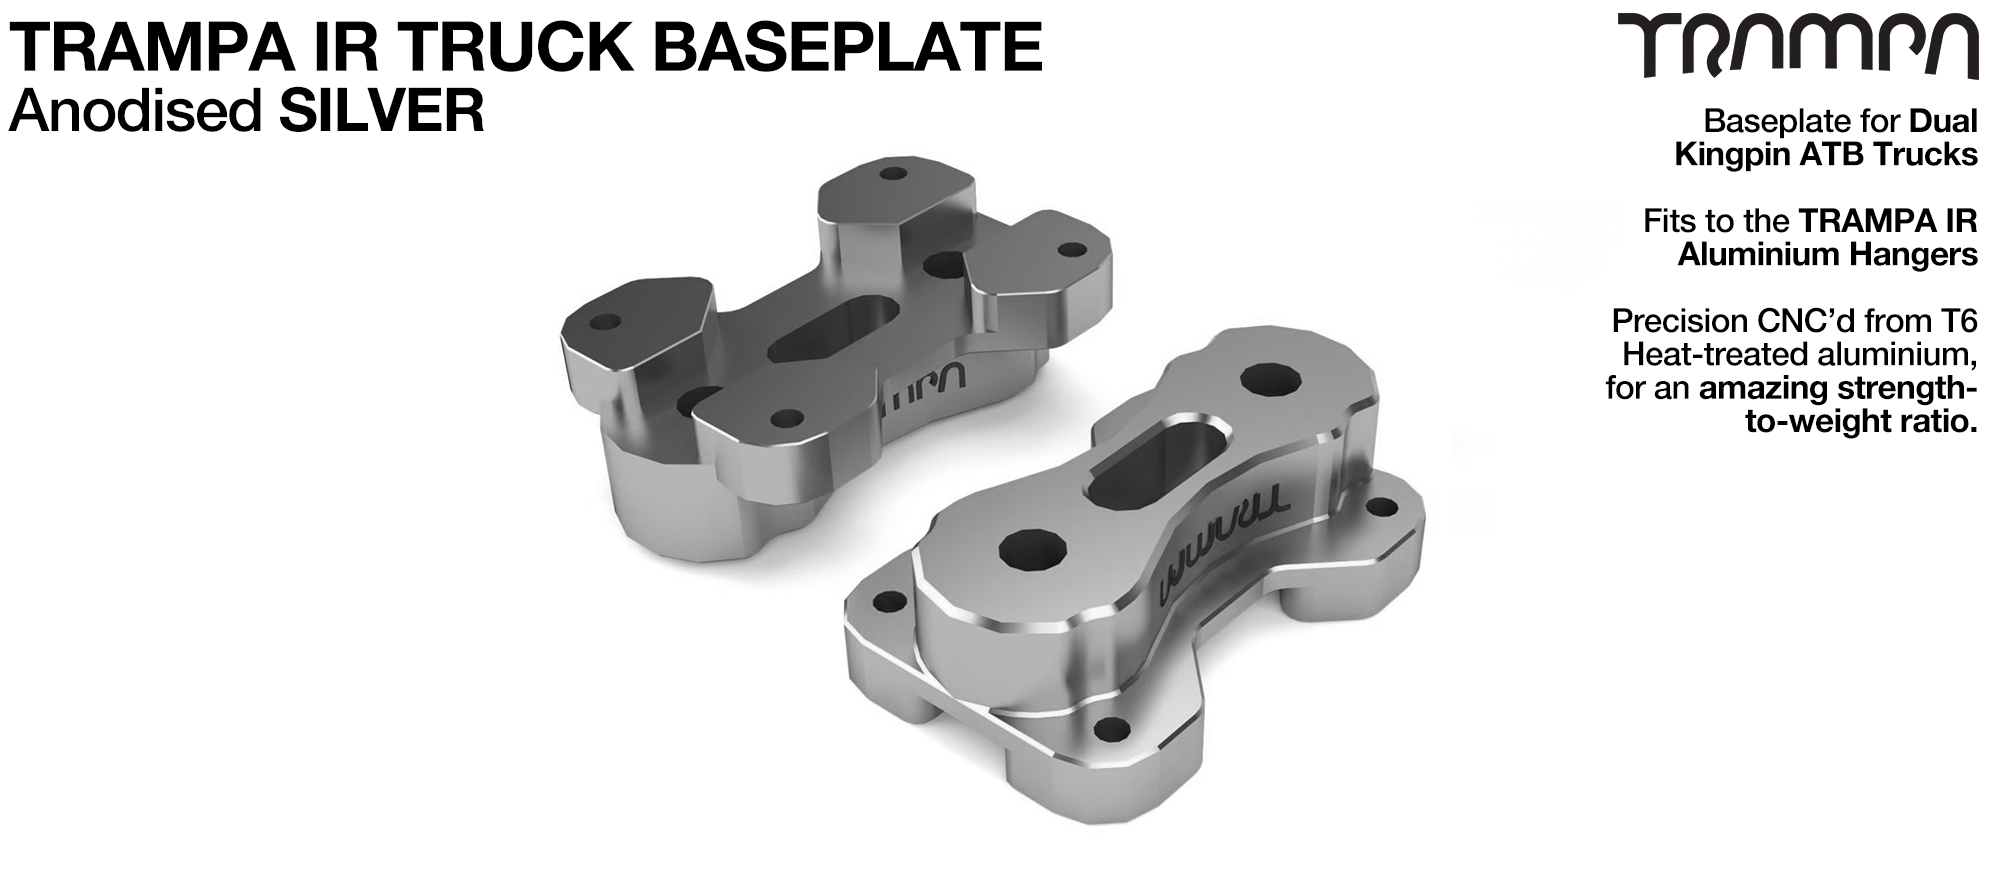 TRAMPA IR BASEPLATE - CNC Precision made TRAMPA IR Trucks are super light & Packed with performance - SILVER